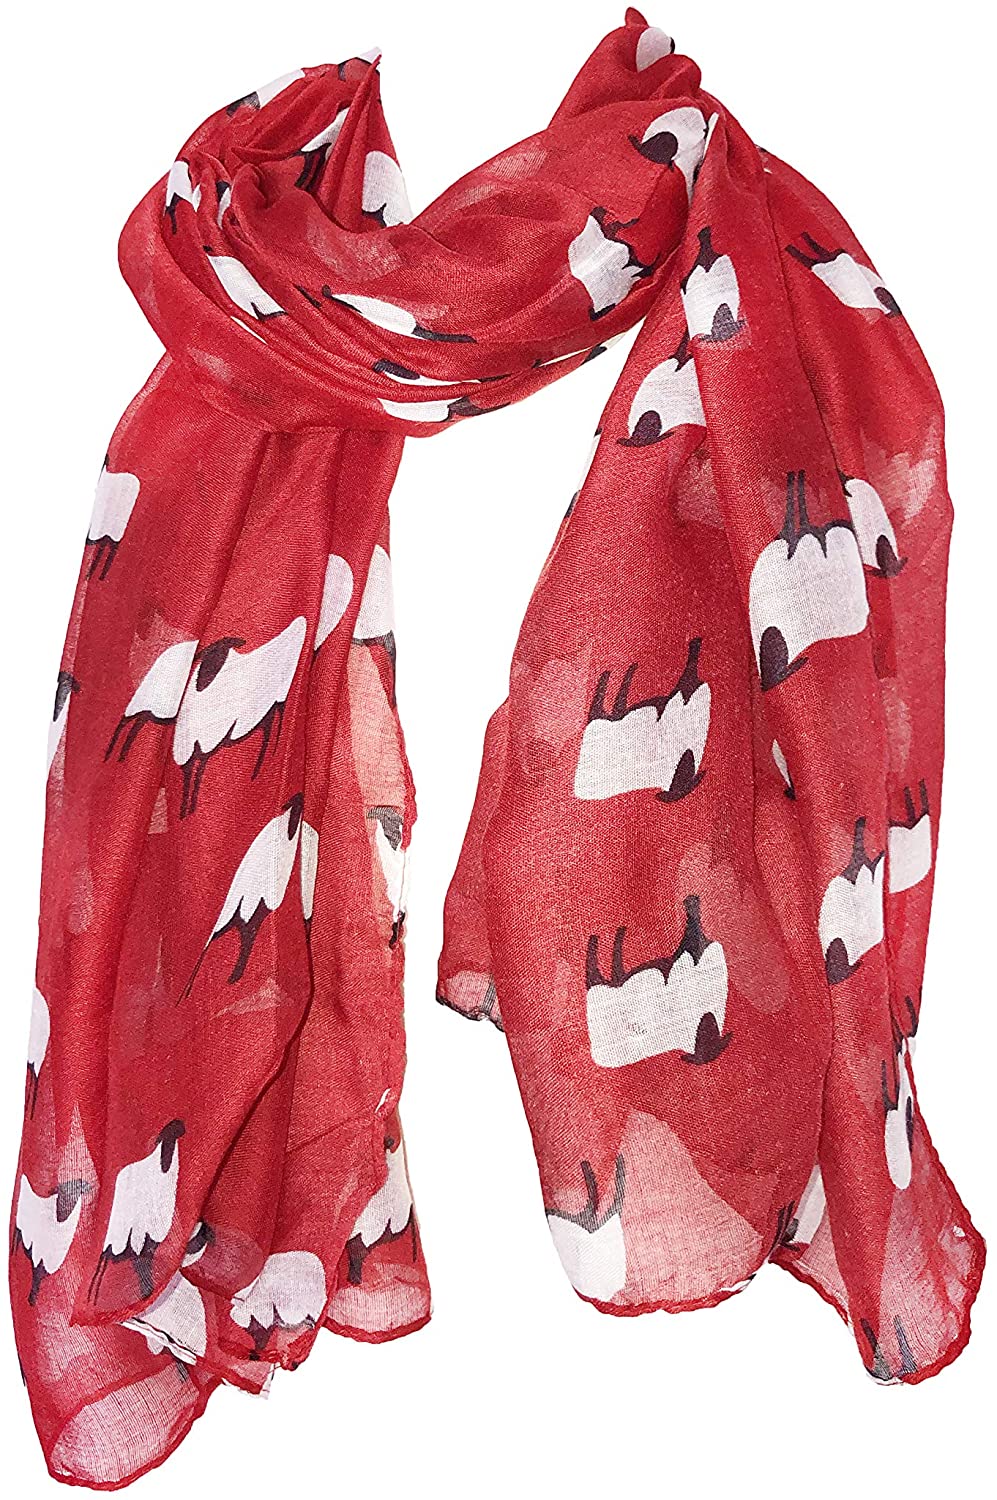 Pamper Yourself Now Red Sheep Design Long Scarf, Great for Presents/Gifts for Sheep Lovers.